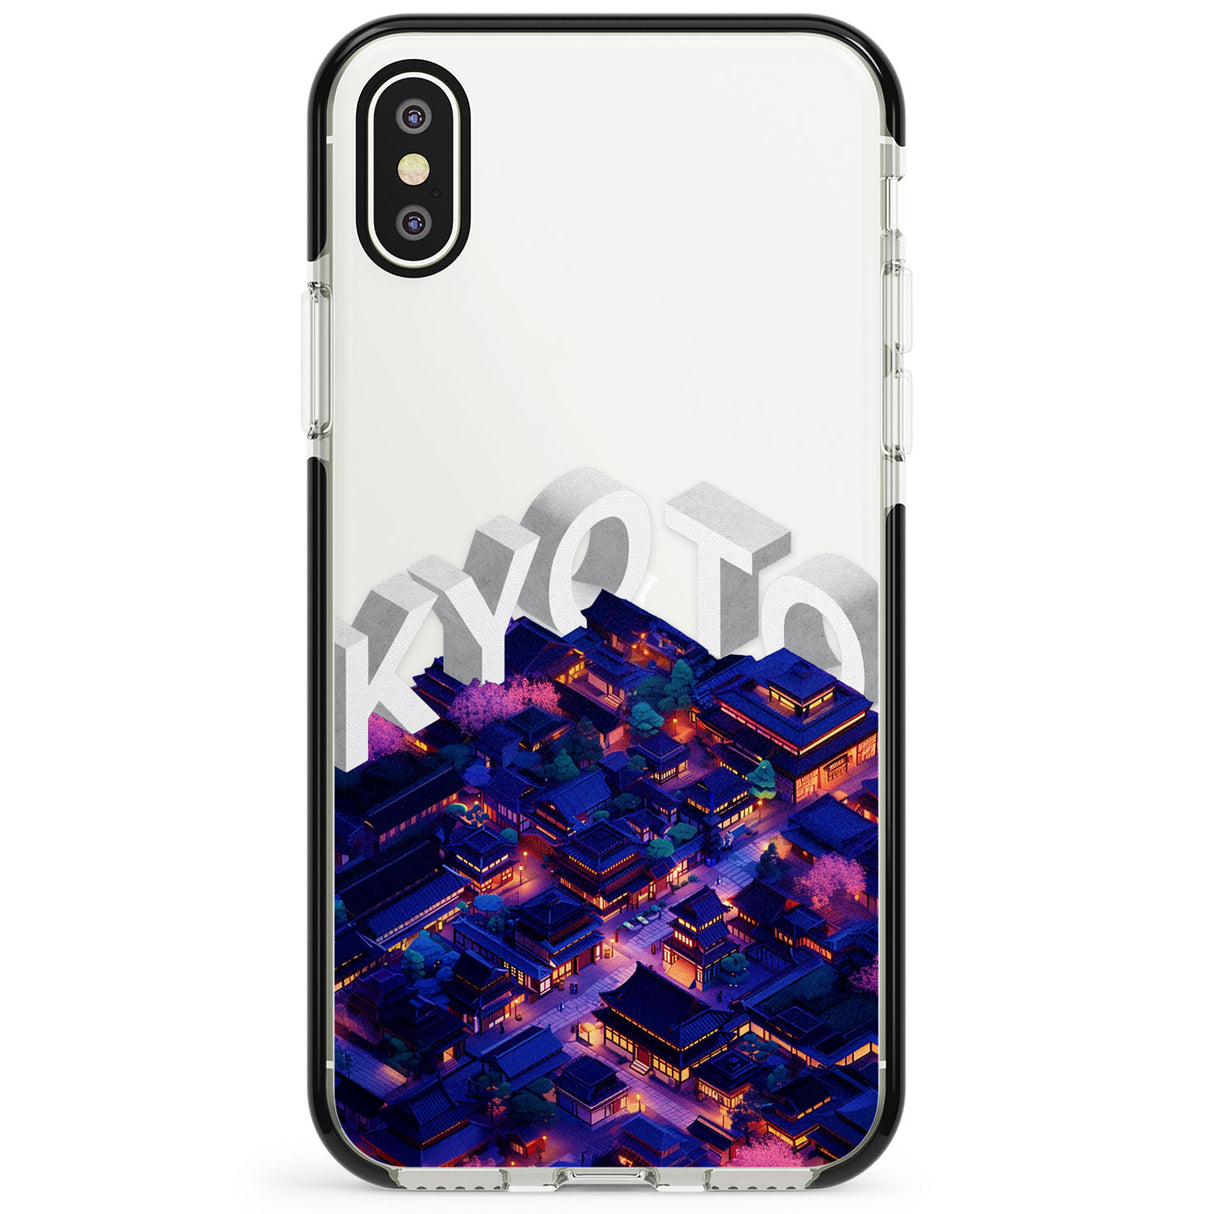 Kyoto Phone Case for iPhone X XS Max XR